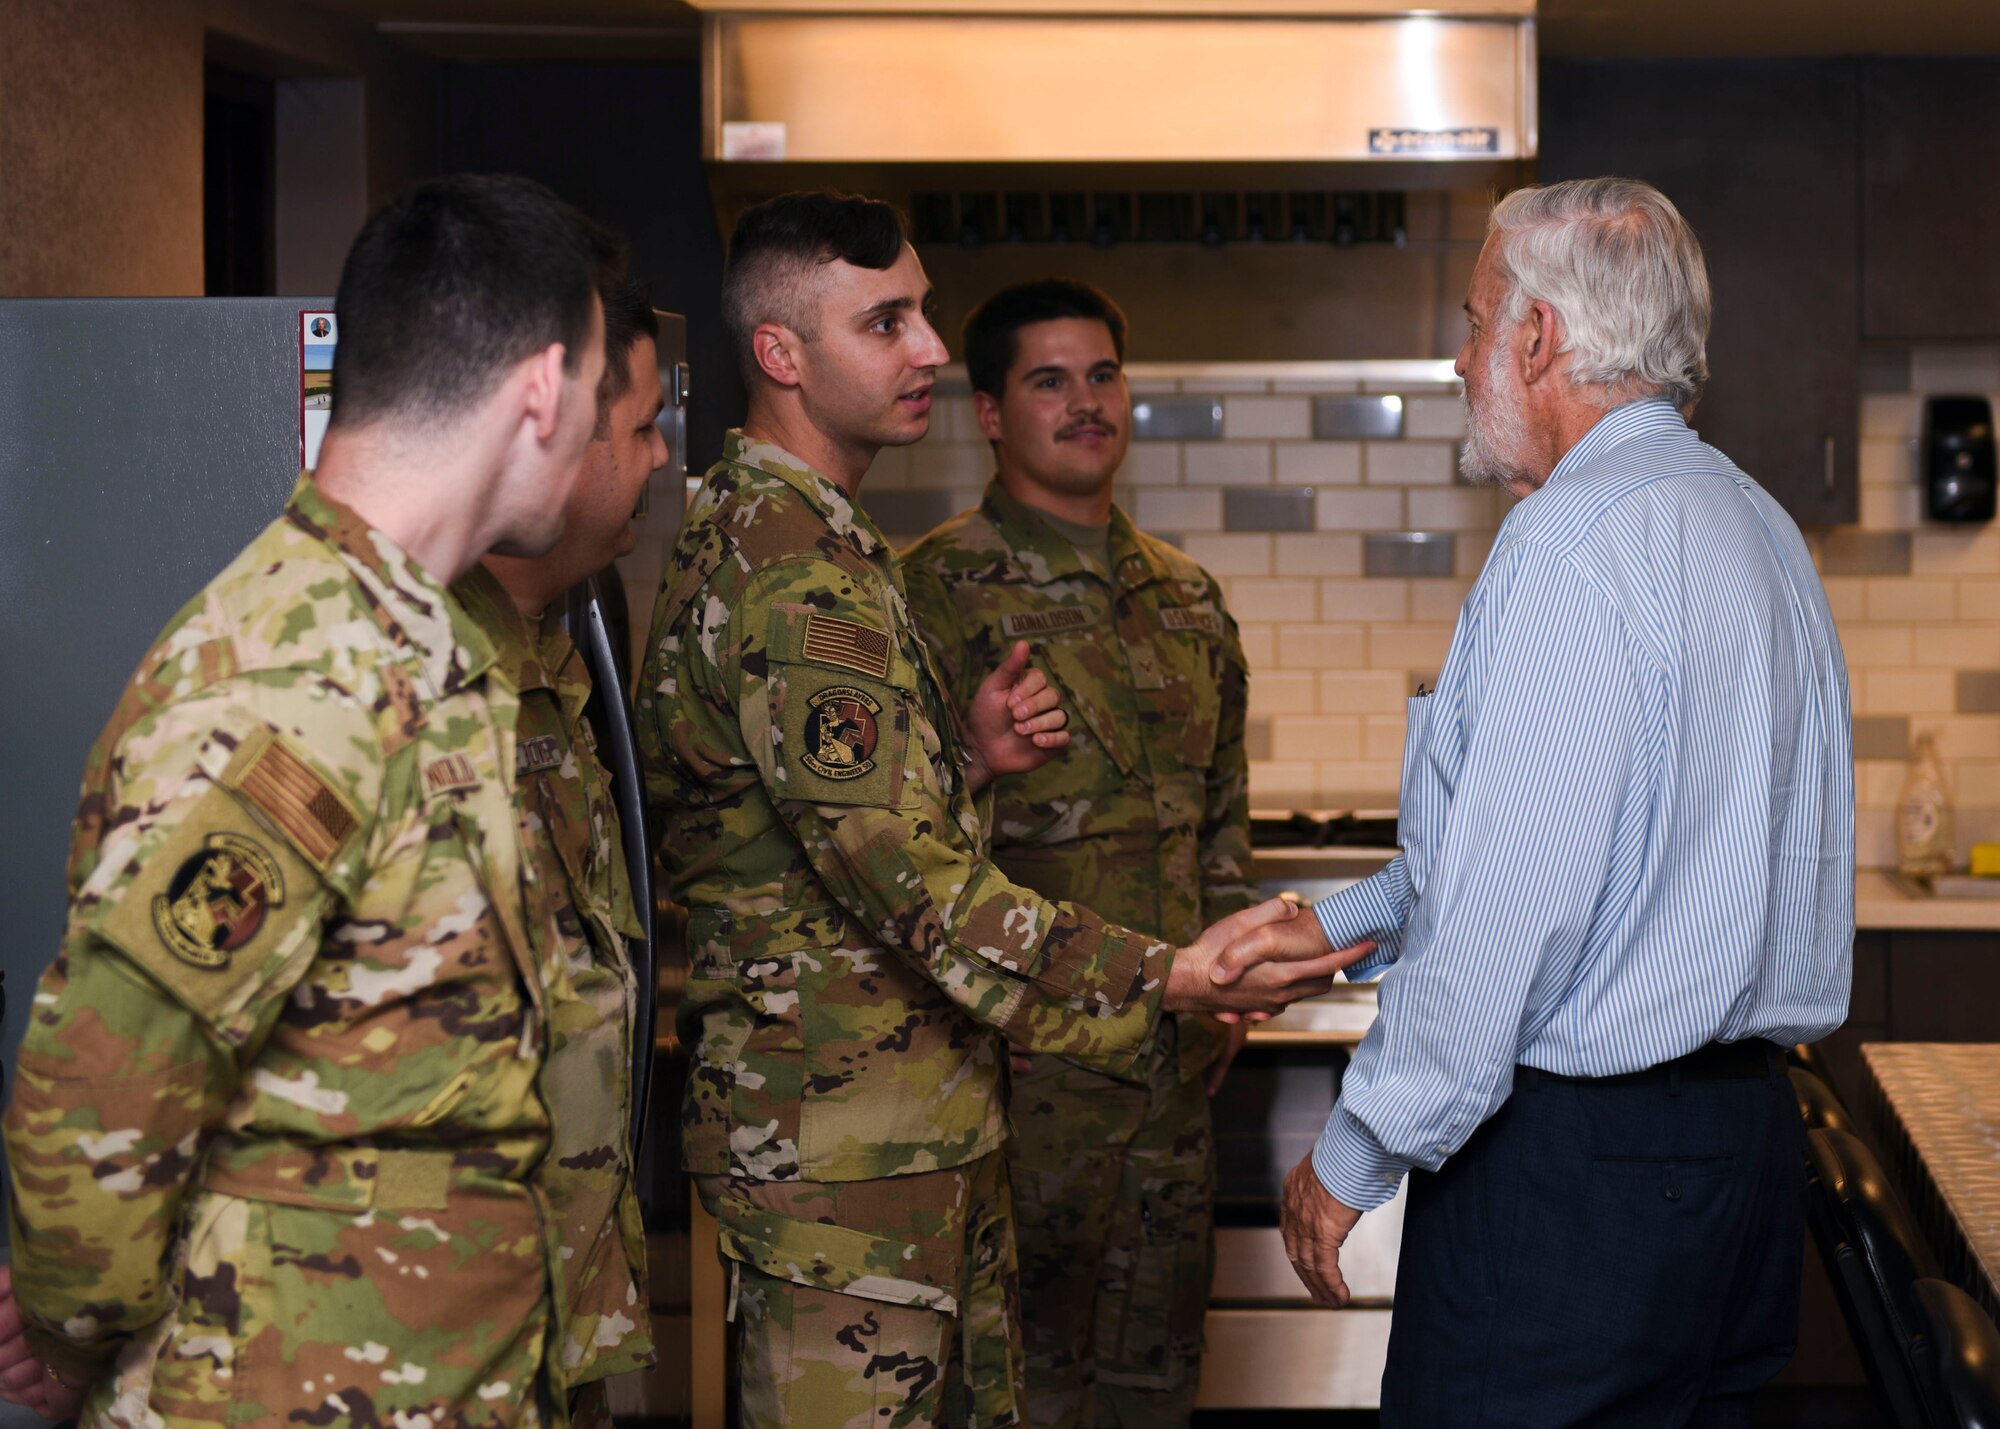 Jerry P. Weiers, Glendale, Arizona mayor, greets 56th Civil Engineer Squadron Airmen during his visit to the Luke Air Force Base Fire Department Aug. 9, 2023, at Luke AFB, Arizona.